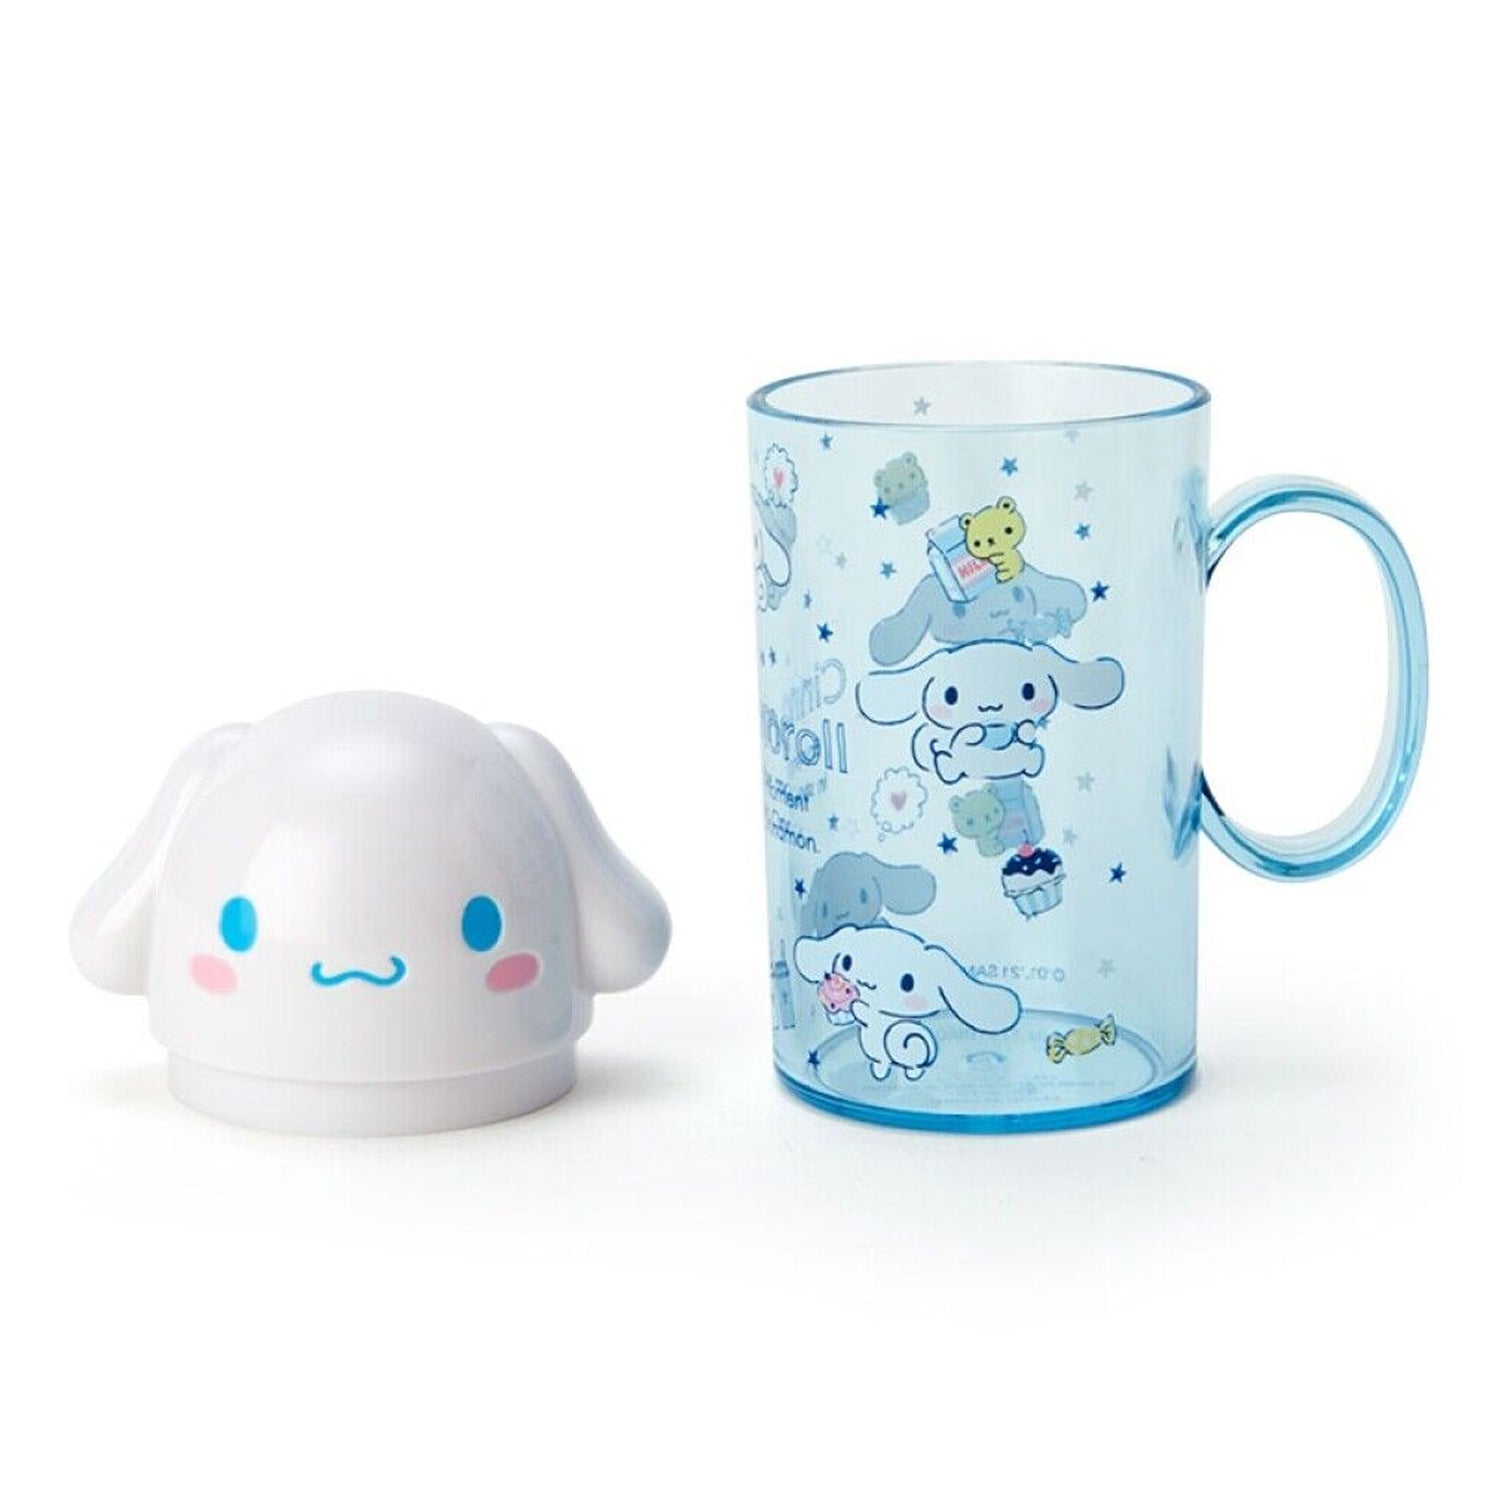 Sanrio Toothbrush Set with Cup